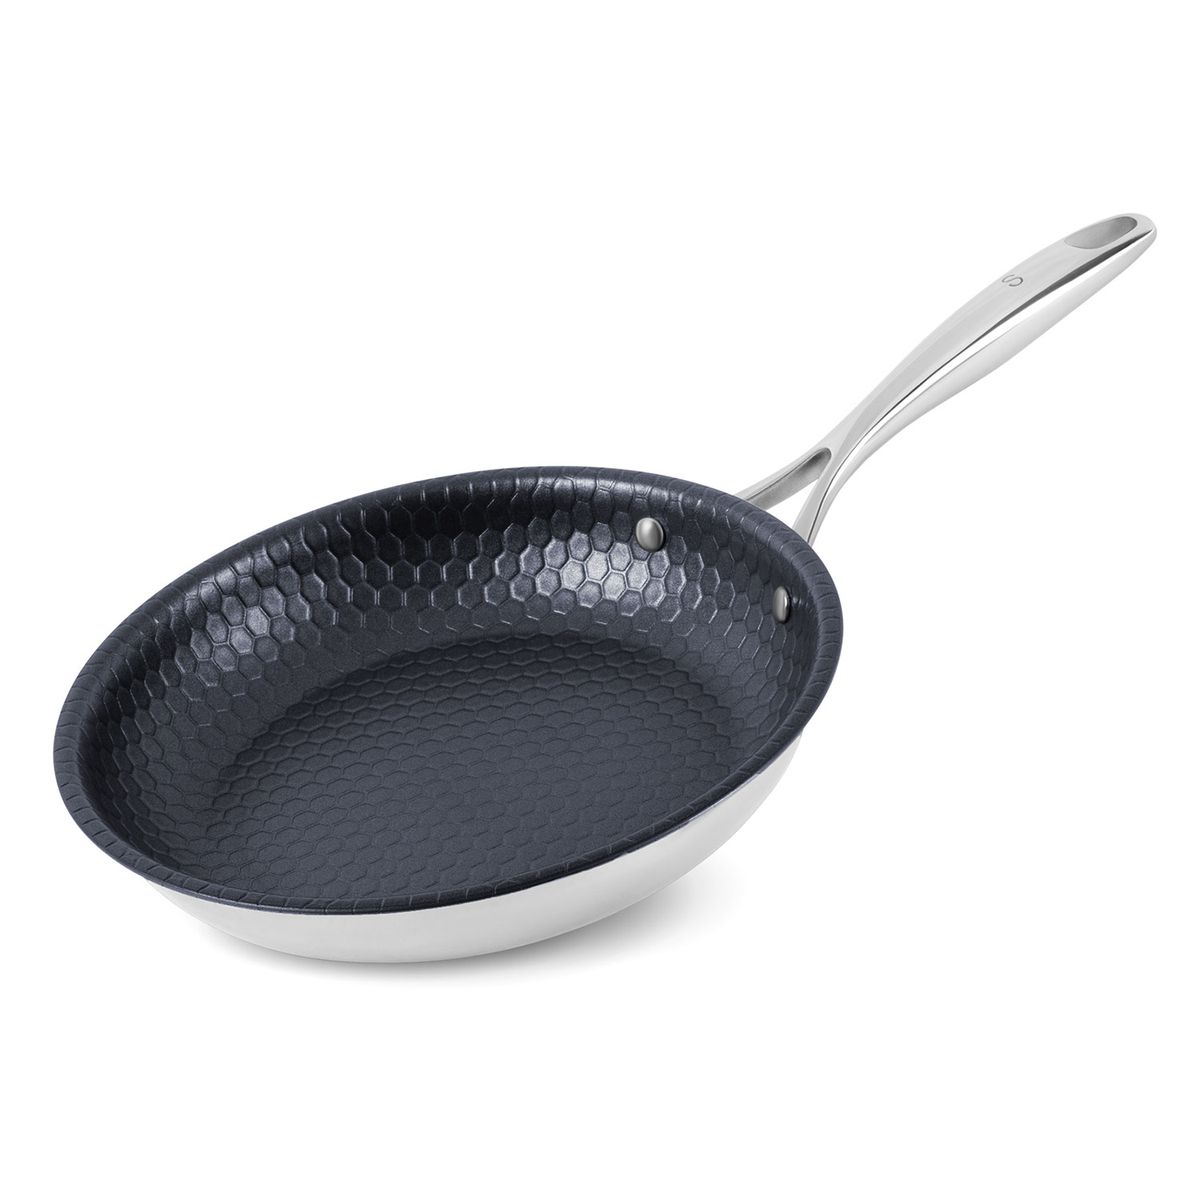 What is the finest non-stick frying pan material?